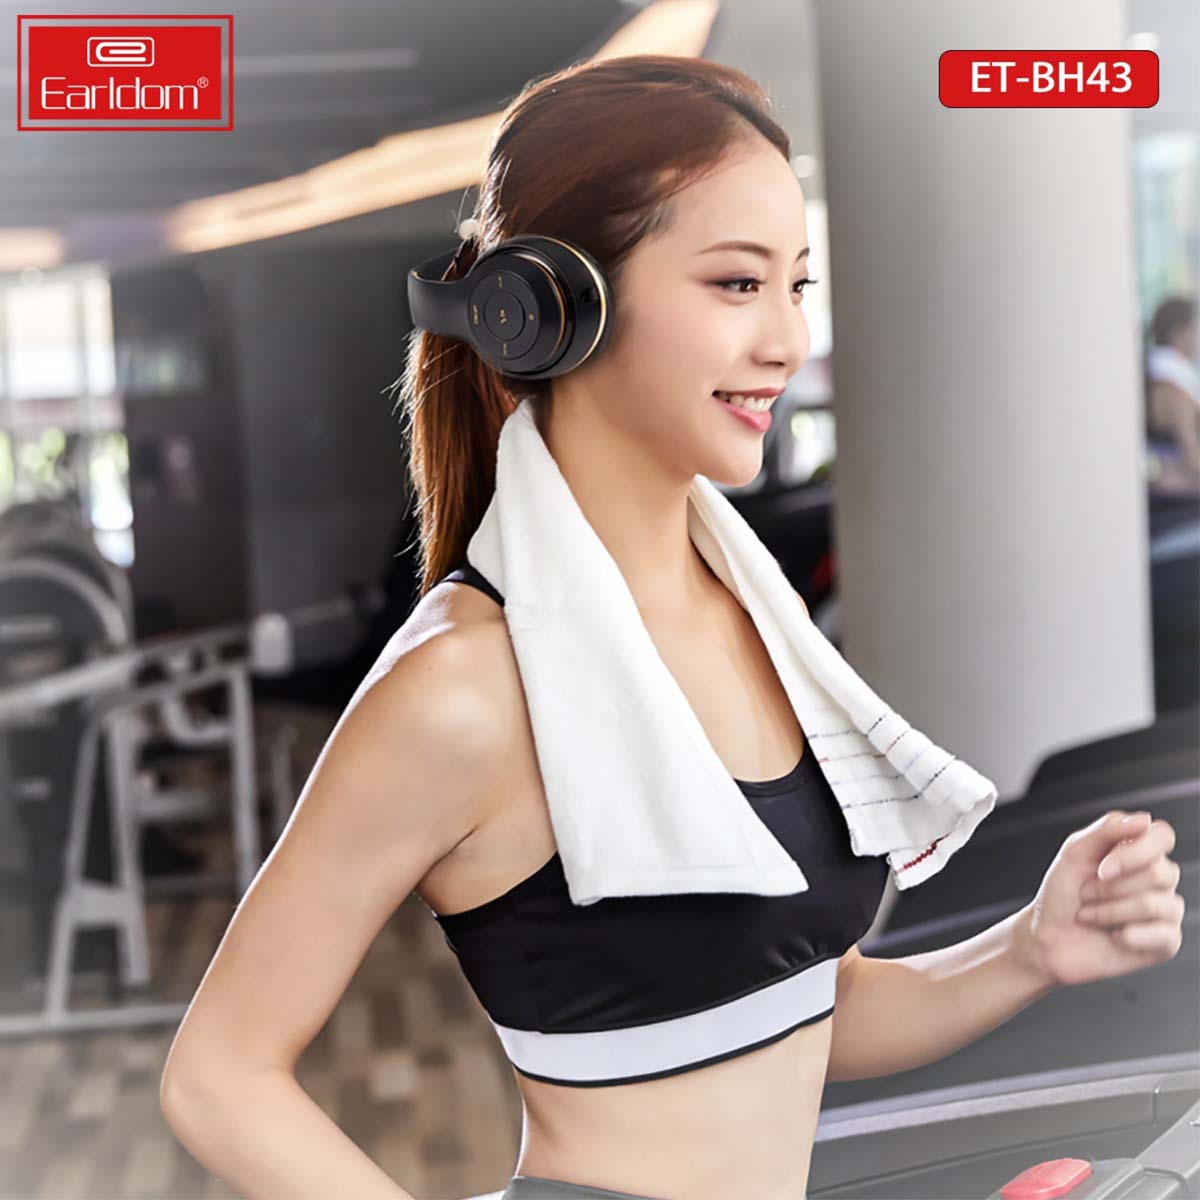 Earldom Bluetooth Headset, Noise Cancelling Stereo Gaming Headphones, USB Headset with Microphone